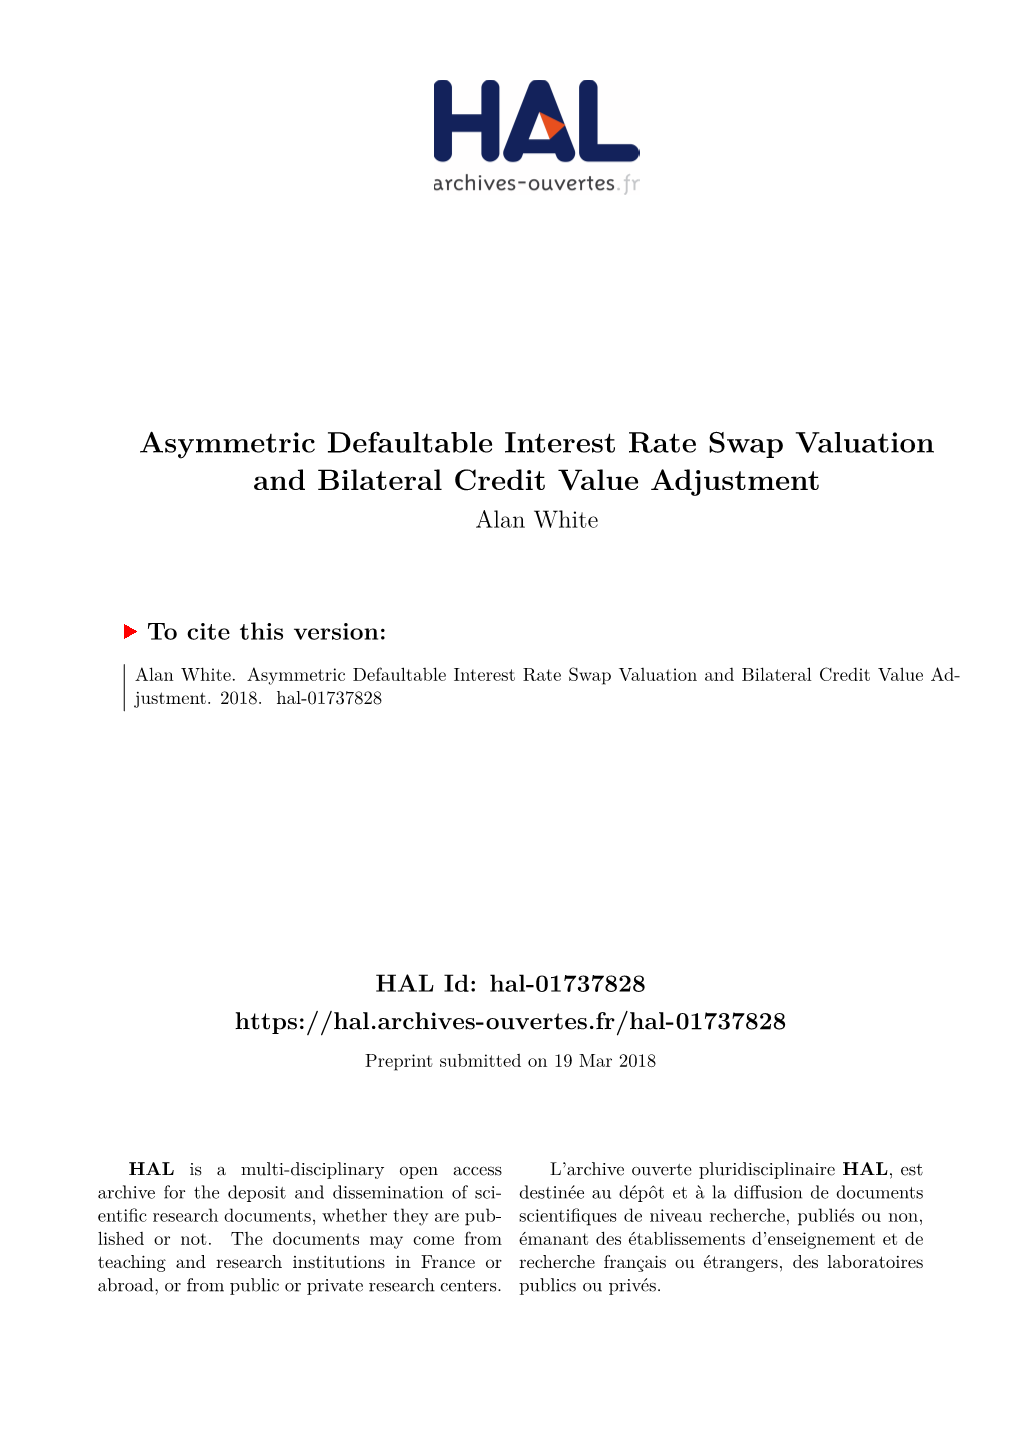 Asymmetric Defaultable Interest Rate Swap Valuation and Bilateral Credit Value Adjustment Alan White